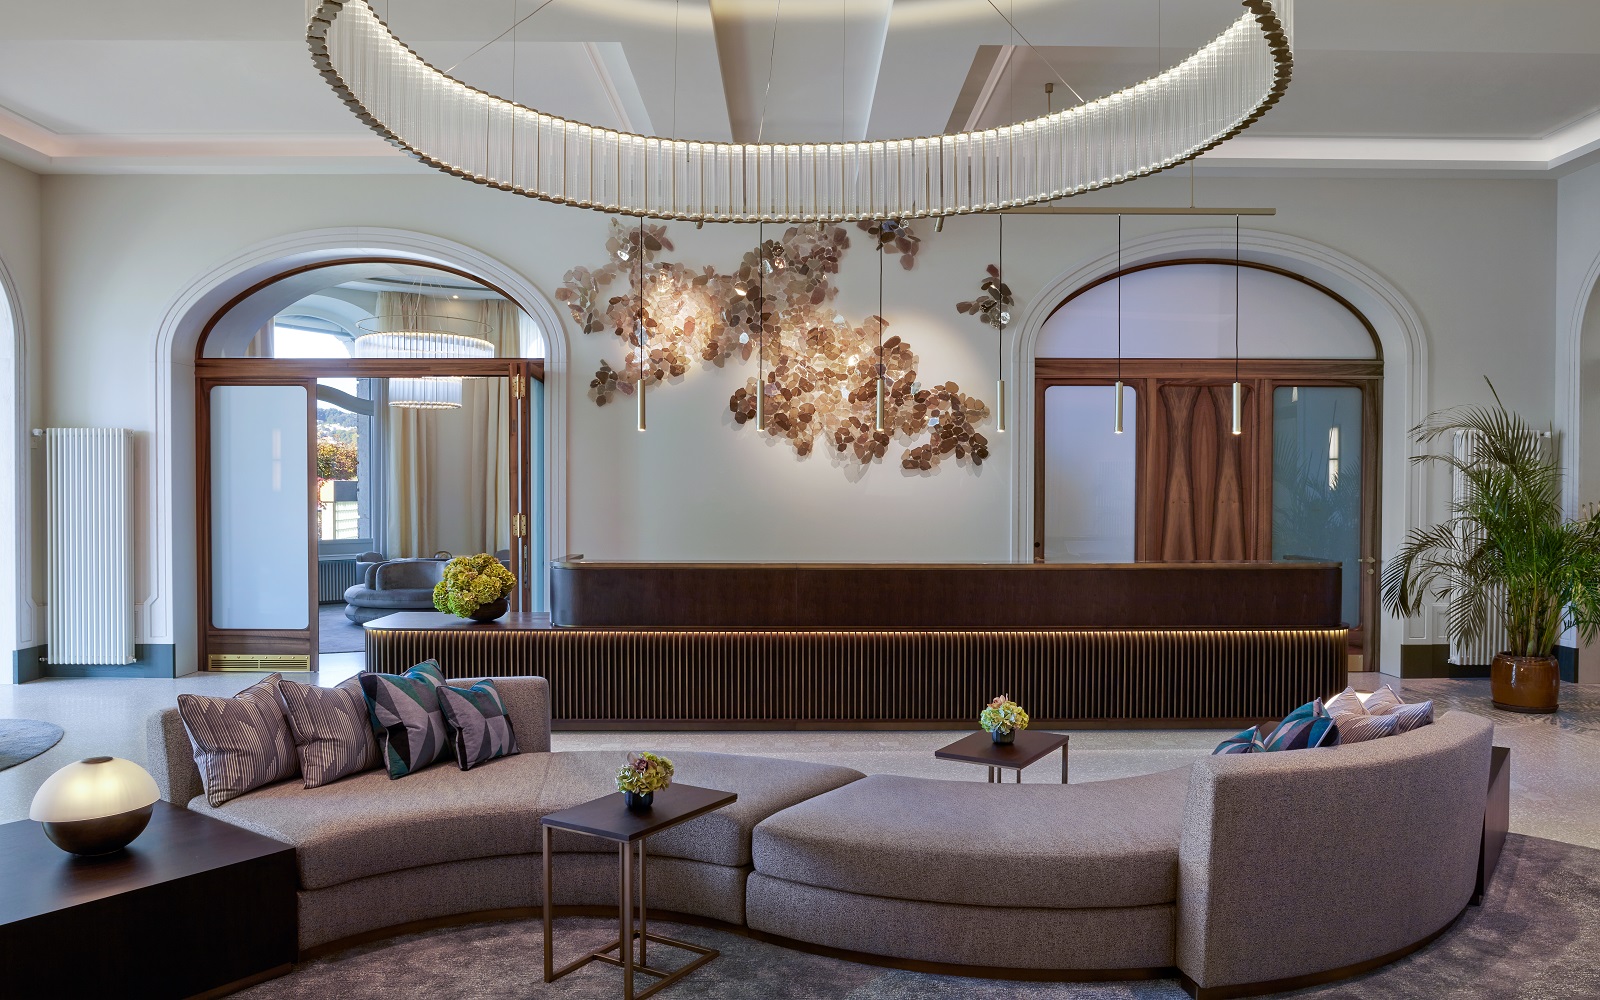 S shaped lavender sofa with statement overhead circualr lighting feature in the lobby of Mandarin Oriental Palace Luzern with interiors by Jestico + Whiles